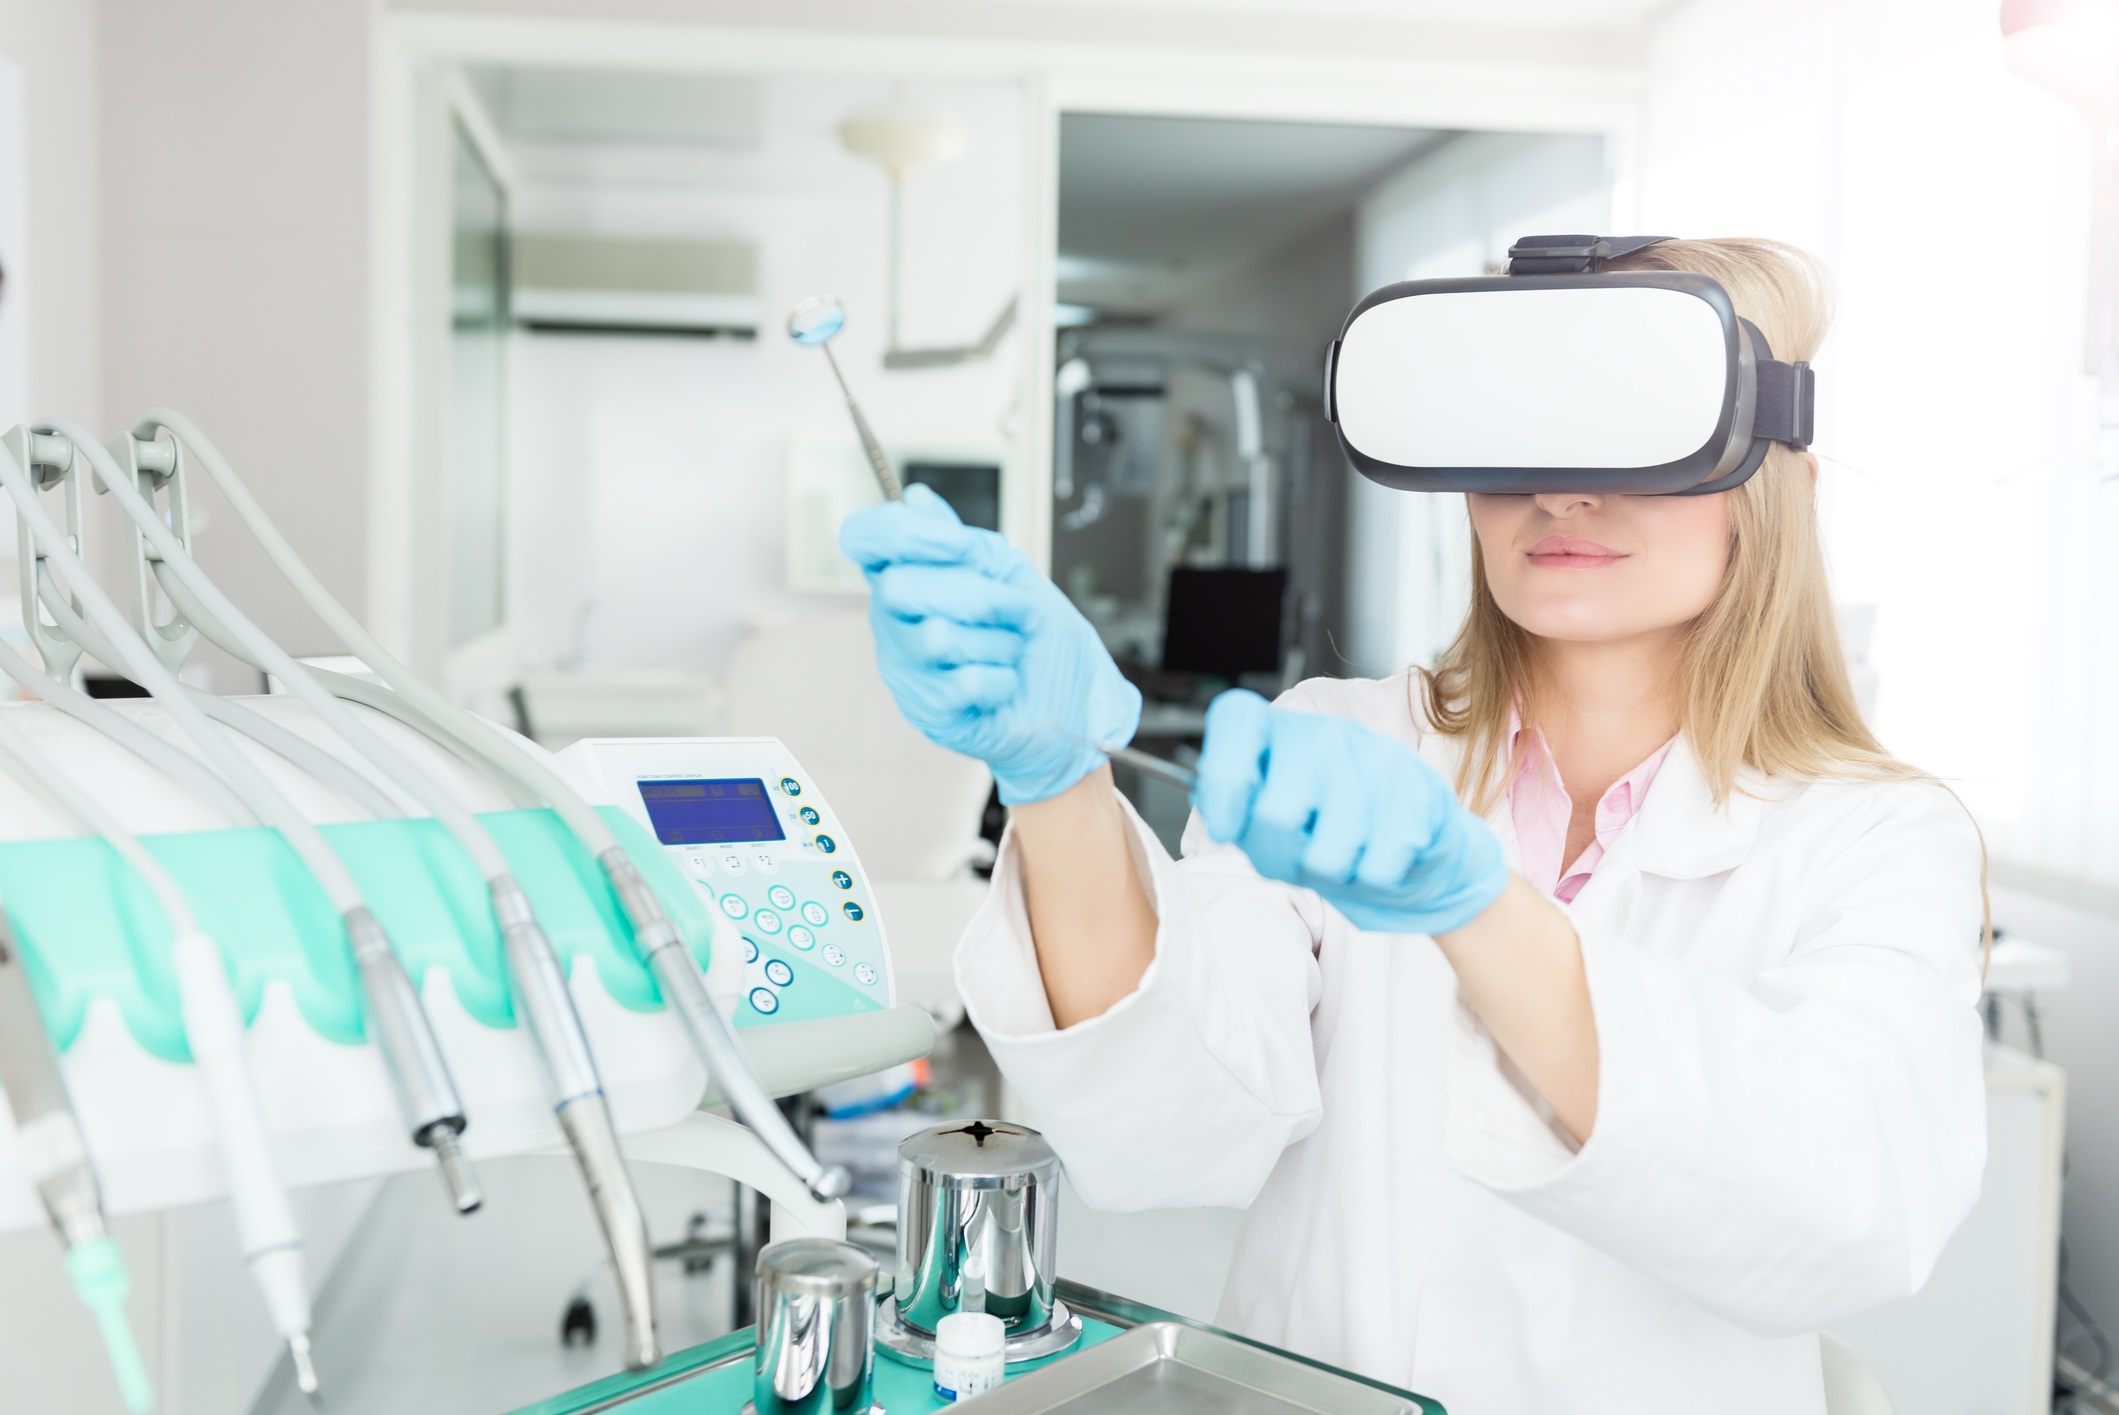 Dentist with Vr headset & dental tools